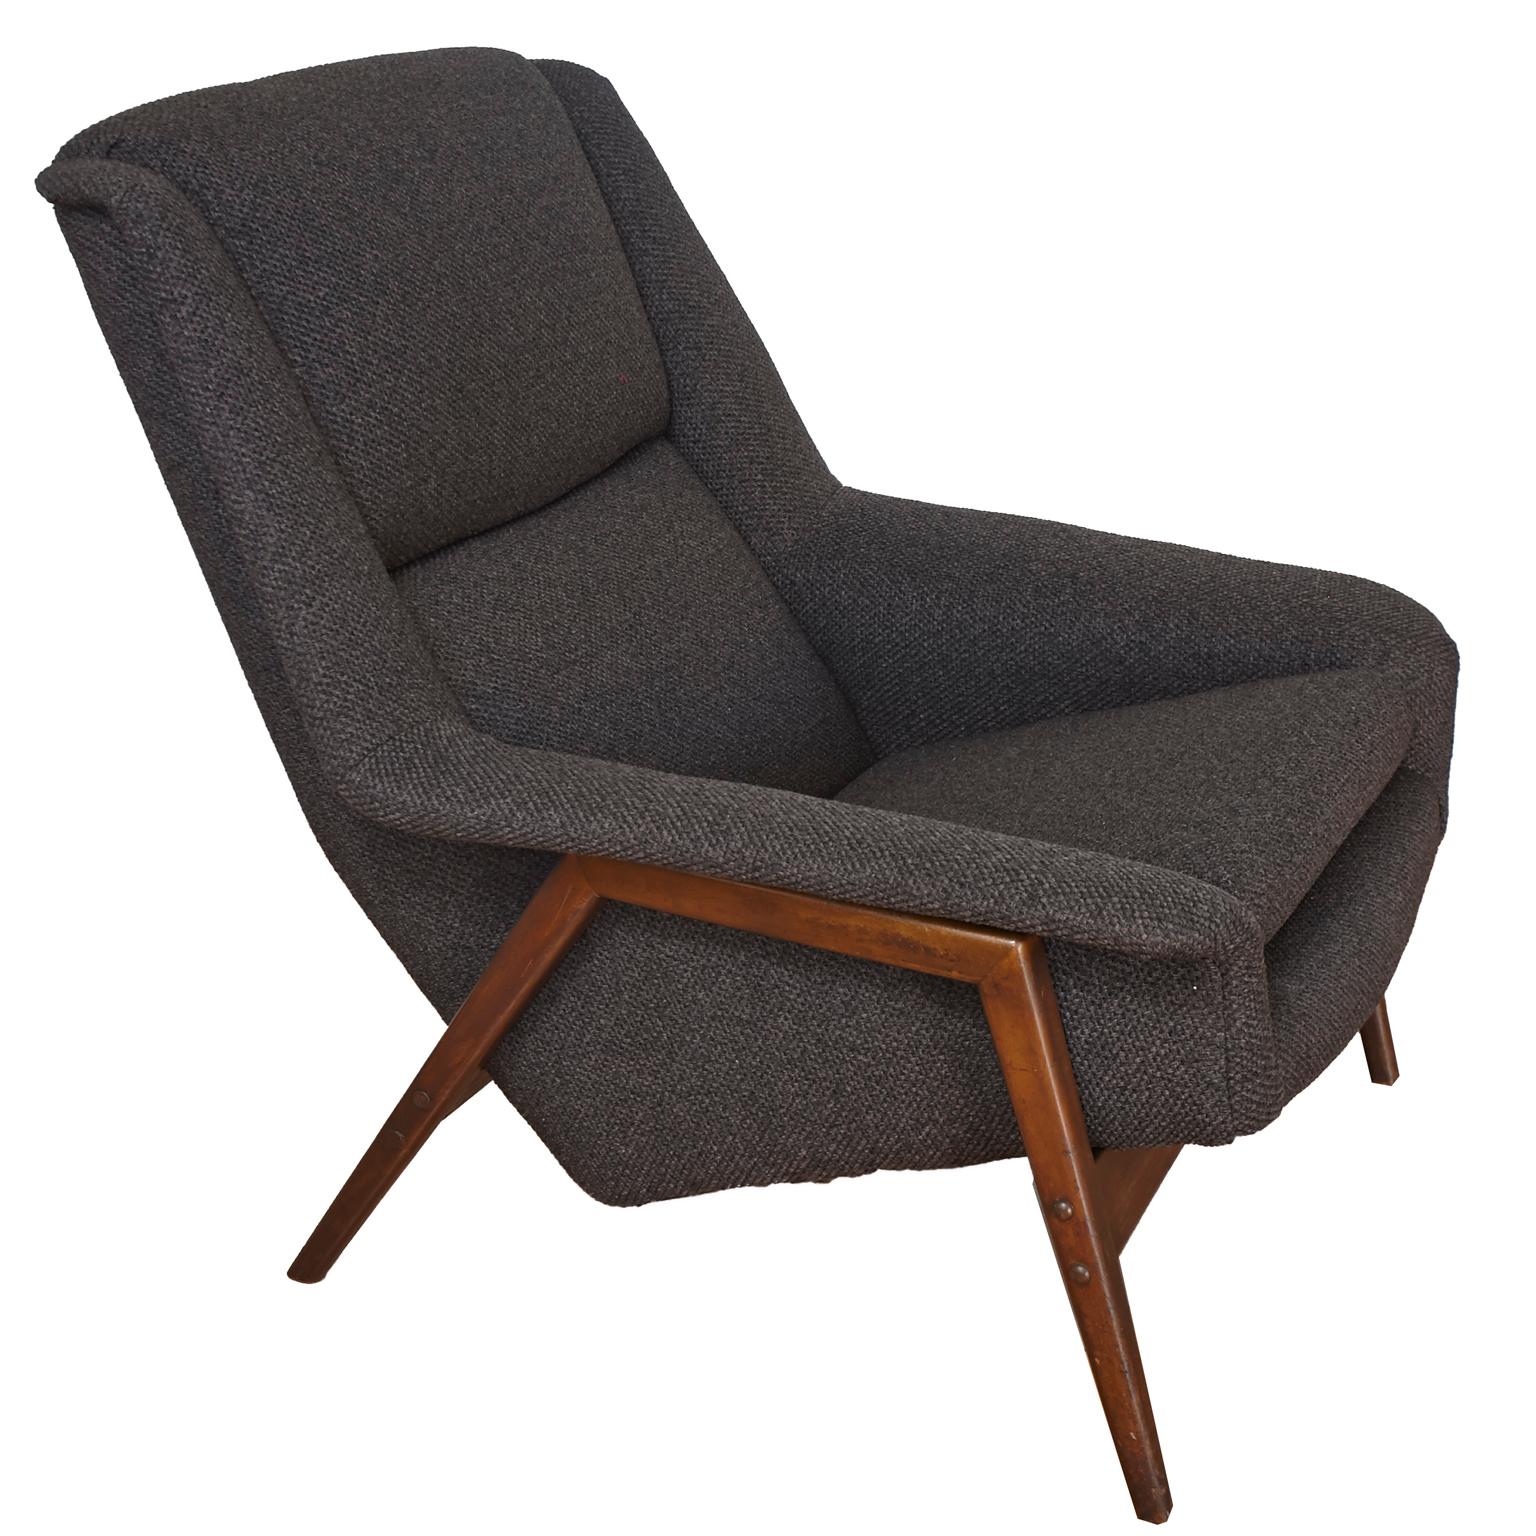 Beautiful charcoal grey DUX lounge chair, designed by Folke Ohlsson.
Reupholstered with charcoal grey Kravet fabric. New foam.
Ready to use in any interior.